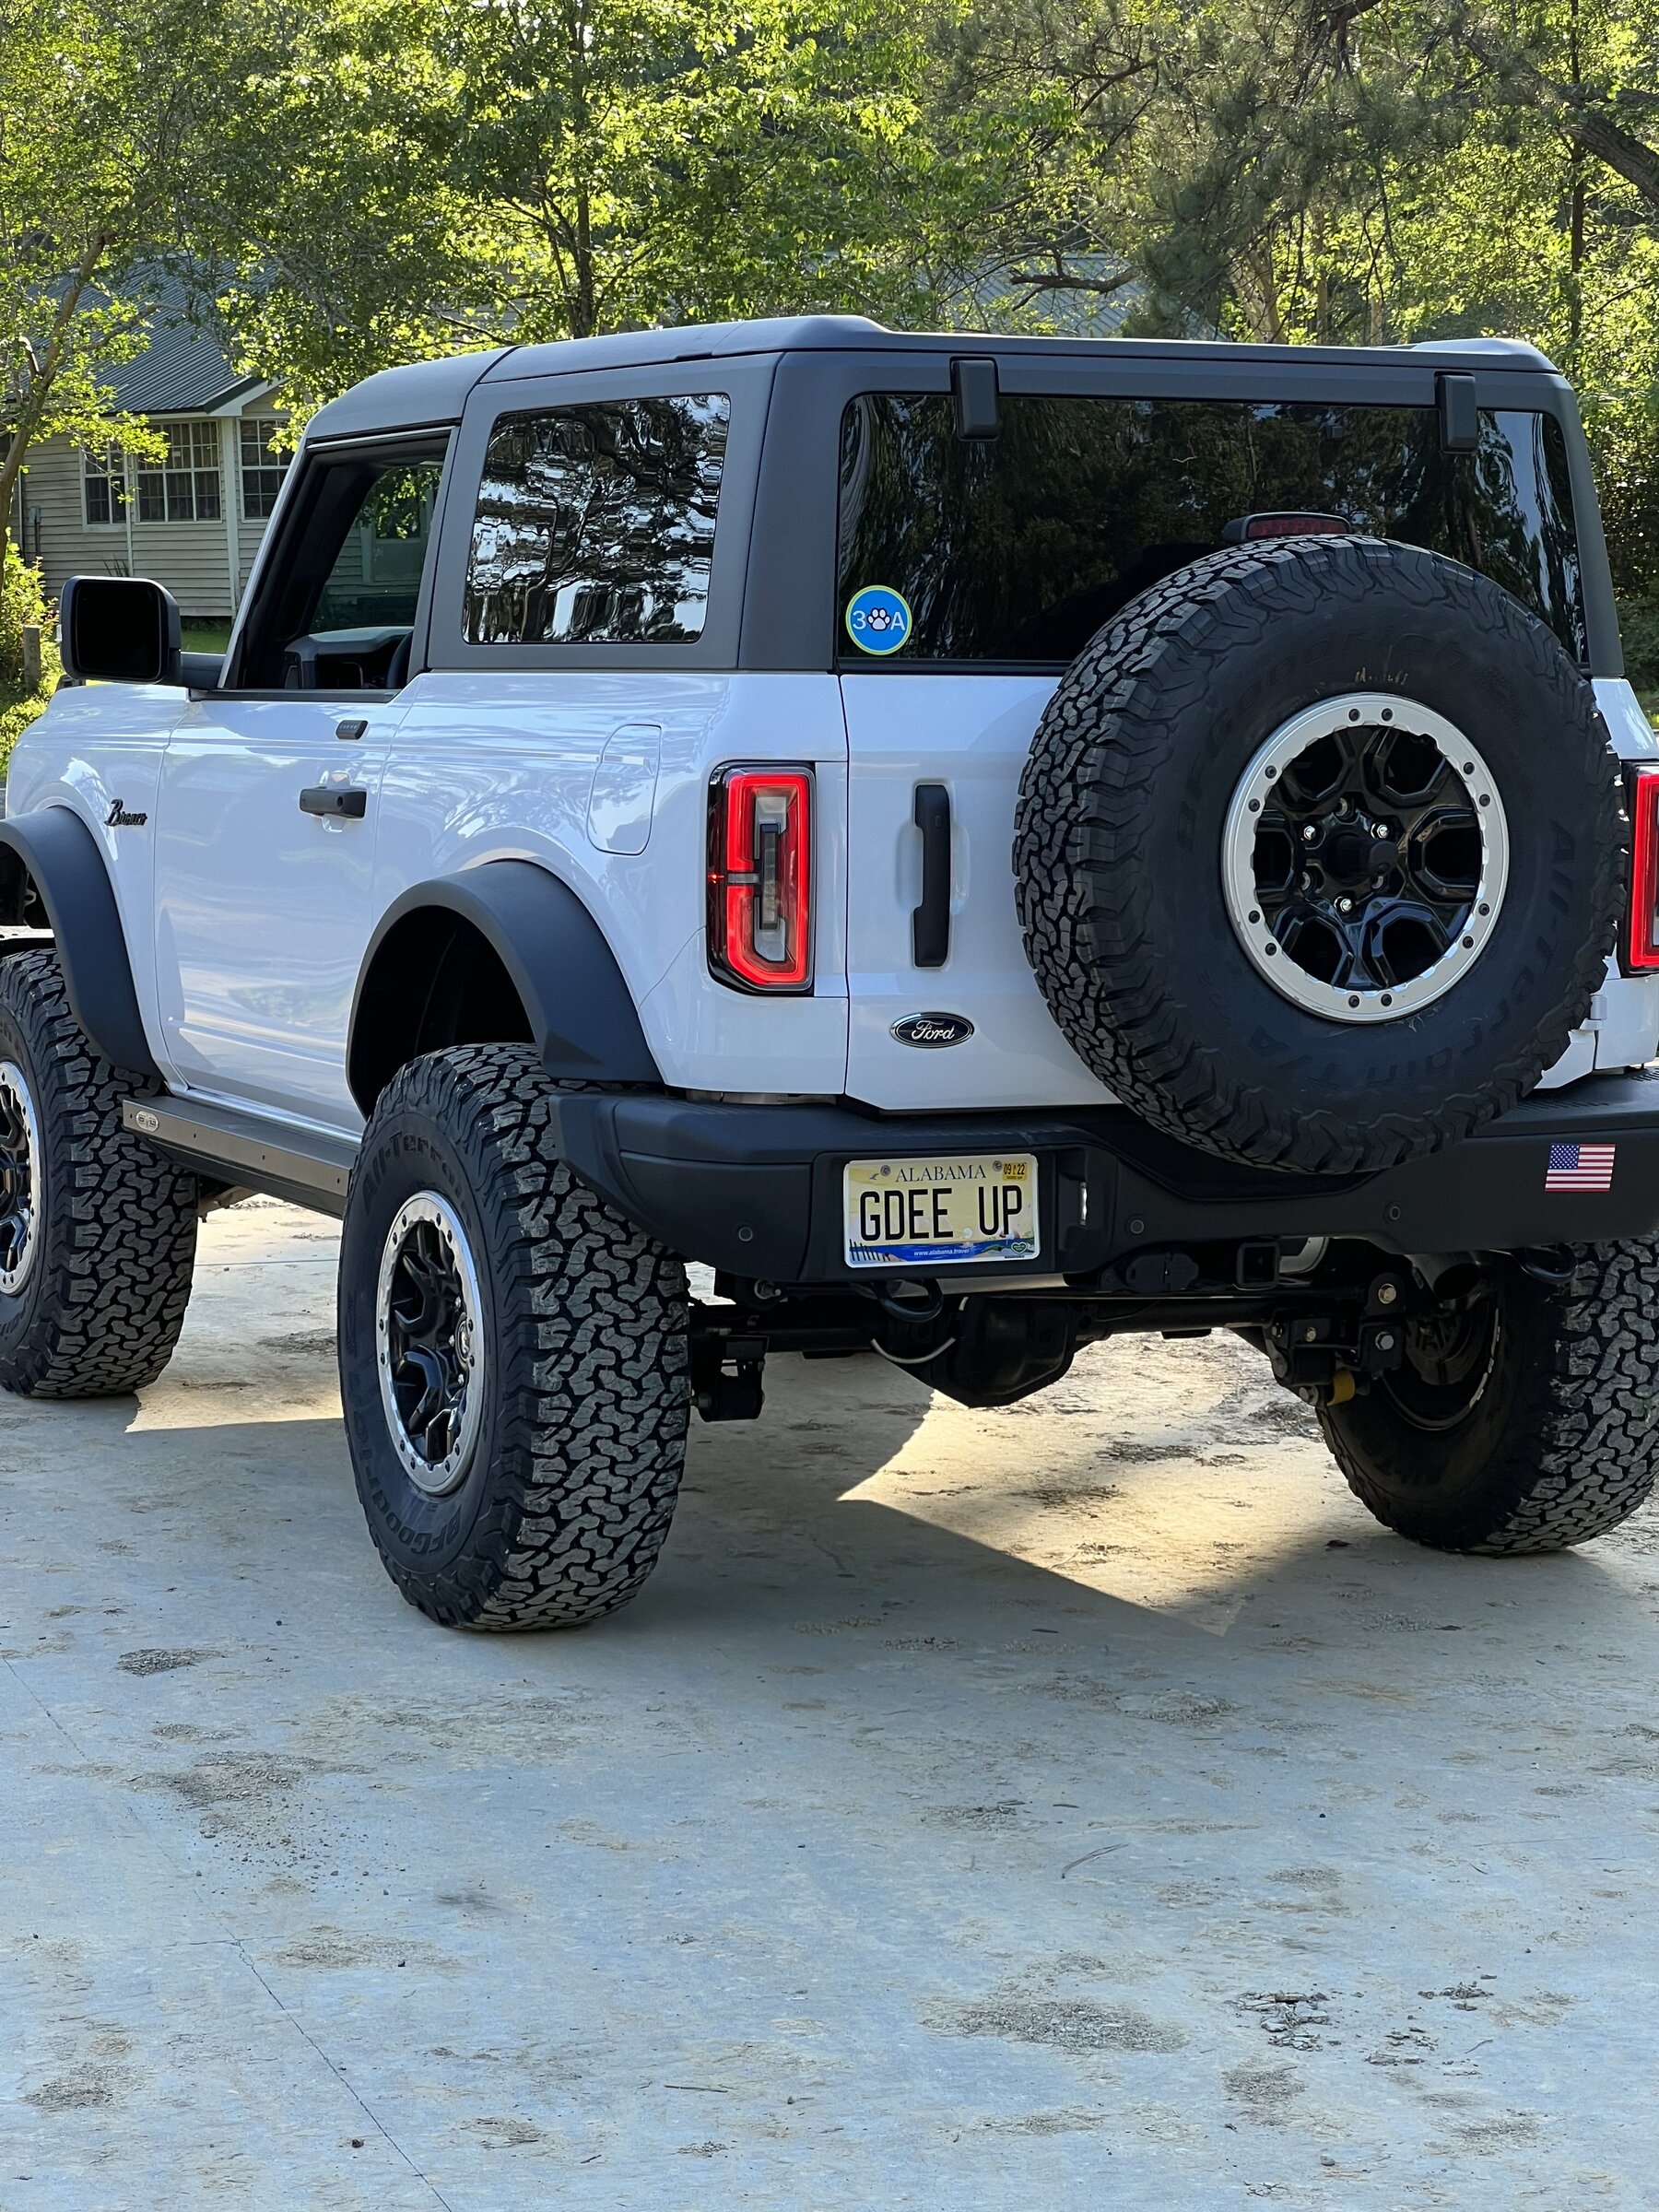 Ford Bronco Sasquatch package + Lift: What is the recommendation to add 37's? E730A7D6-504C-4EAF-95CF-18727768EA9F